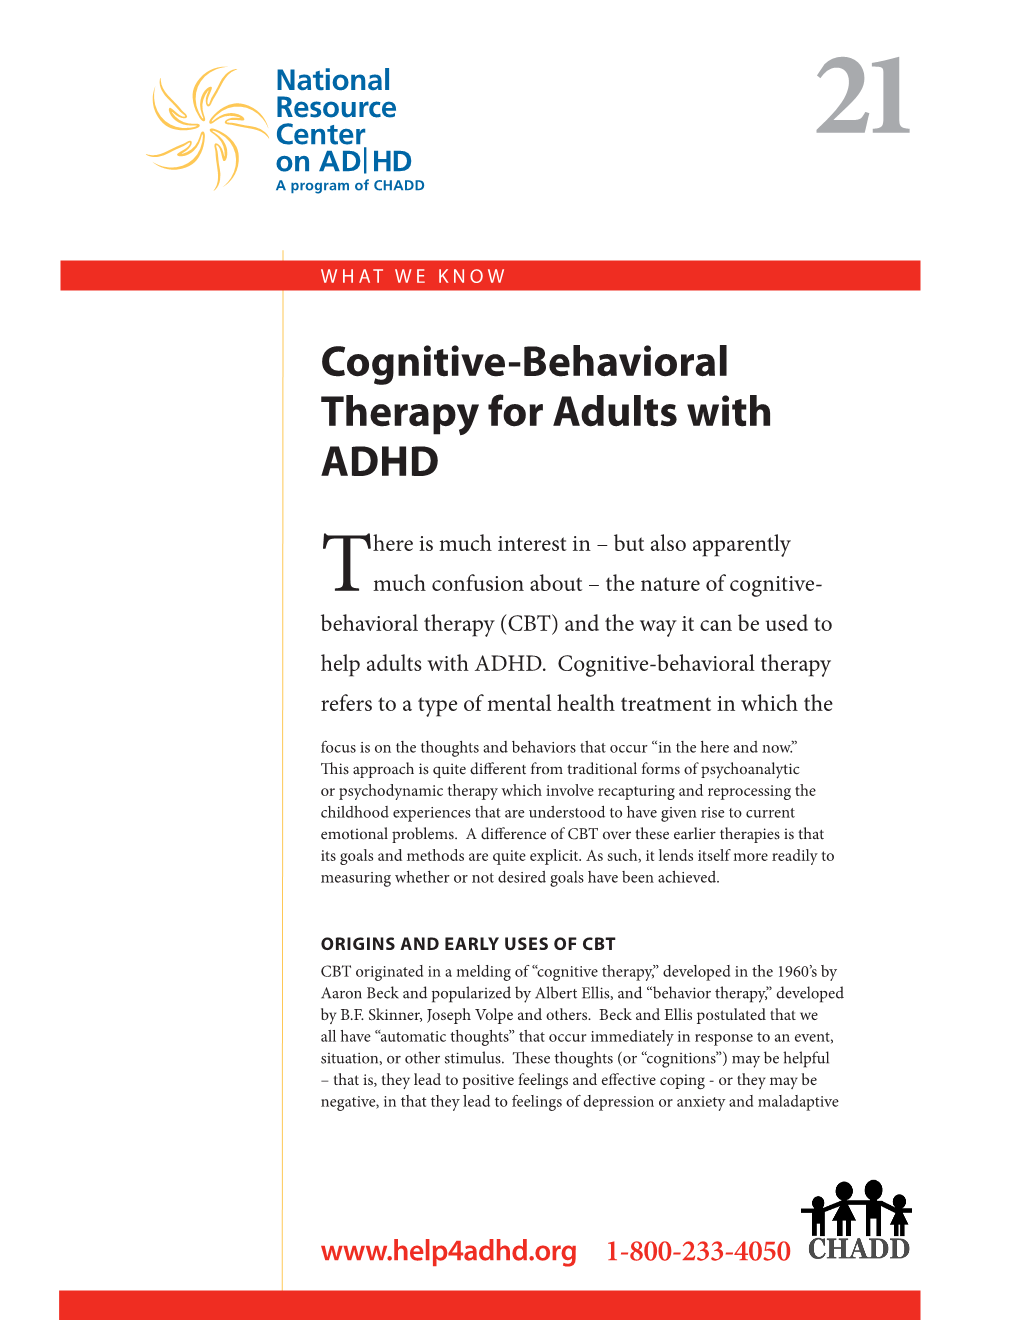 Cognitive-Behavioral Therapy for Adults with ADHD